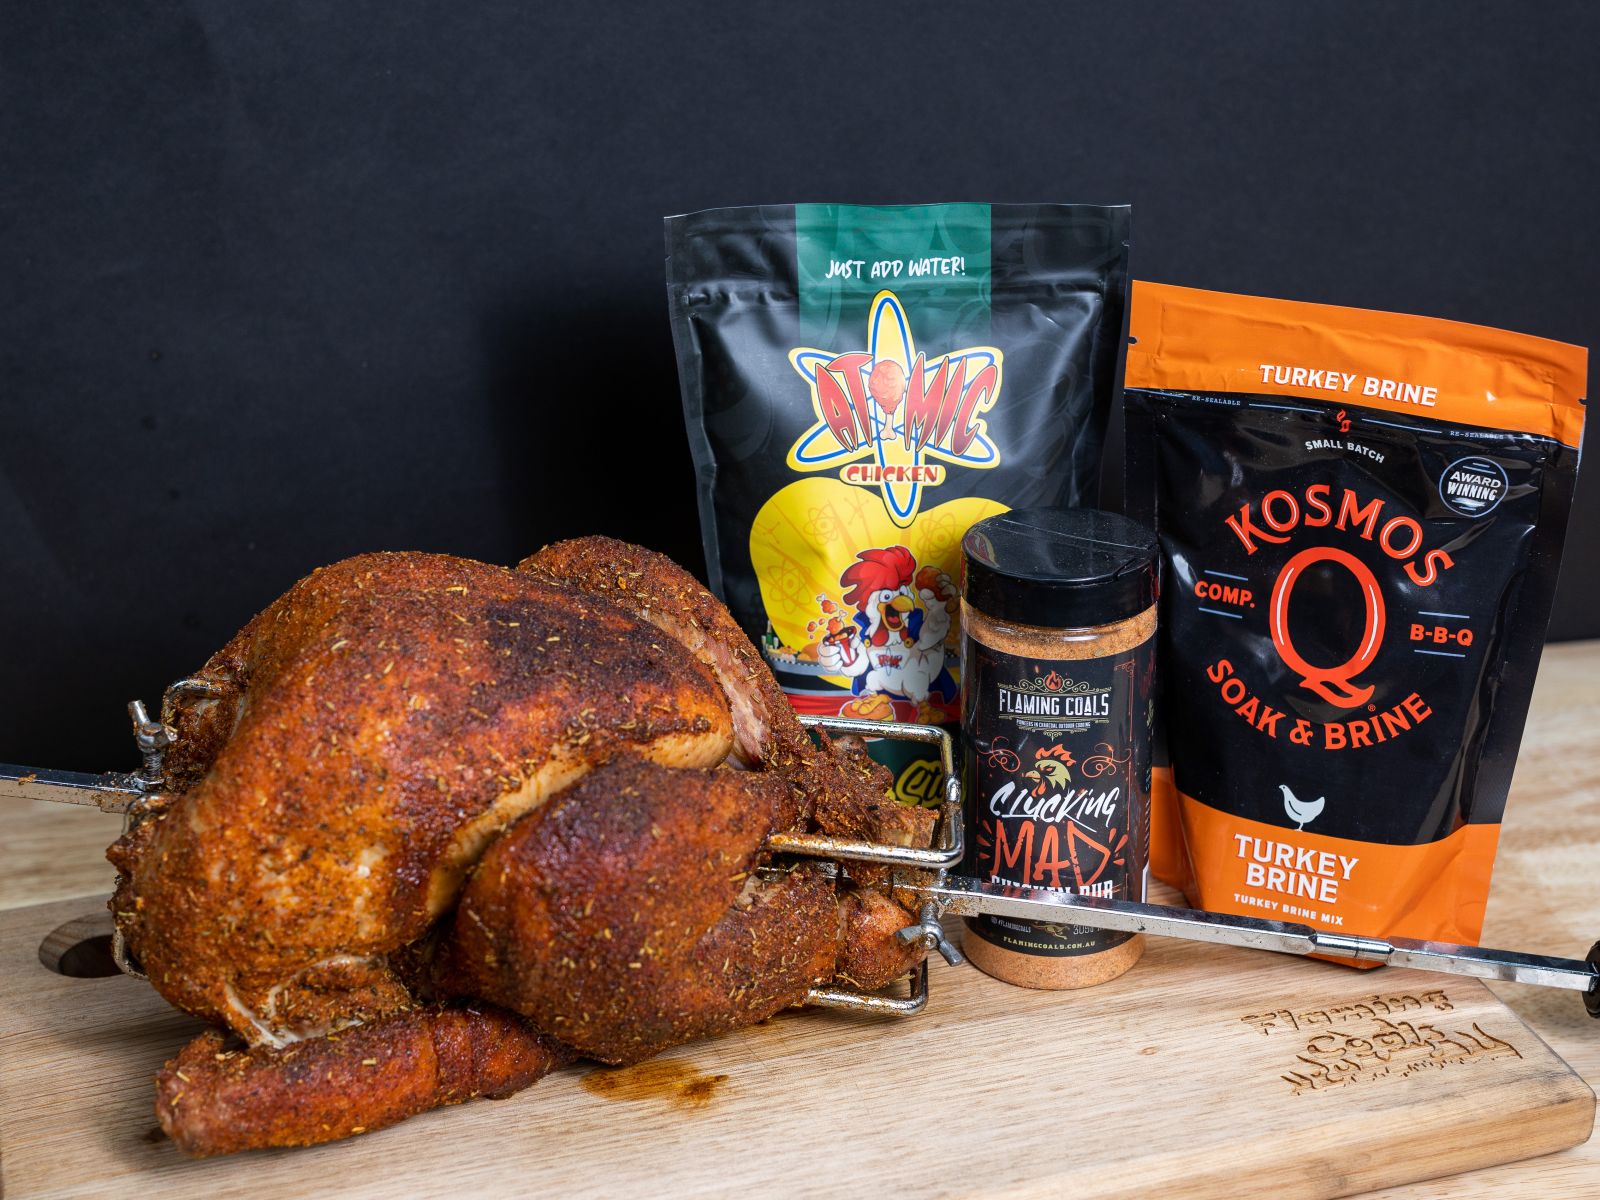 This image shows a whole chicken, Flaming coals clucking mad, Atomic Chicken Stuffing and Kosmos Q Brine. 